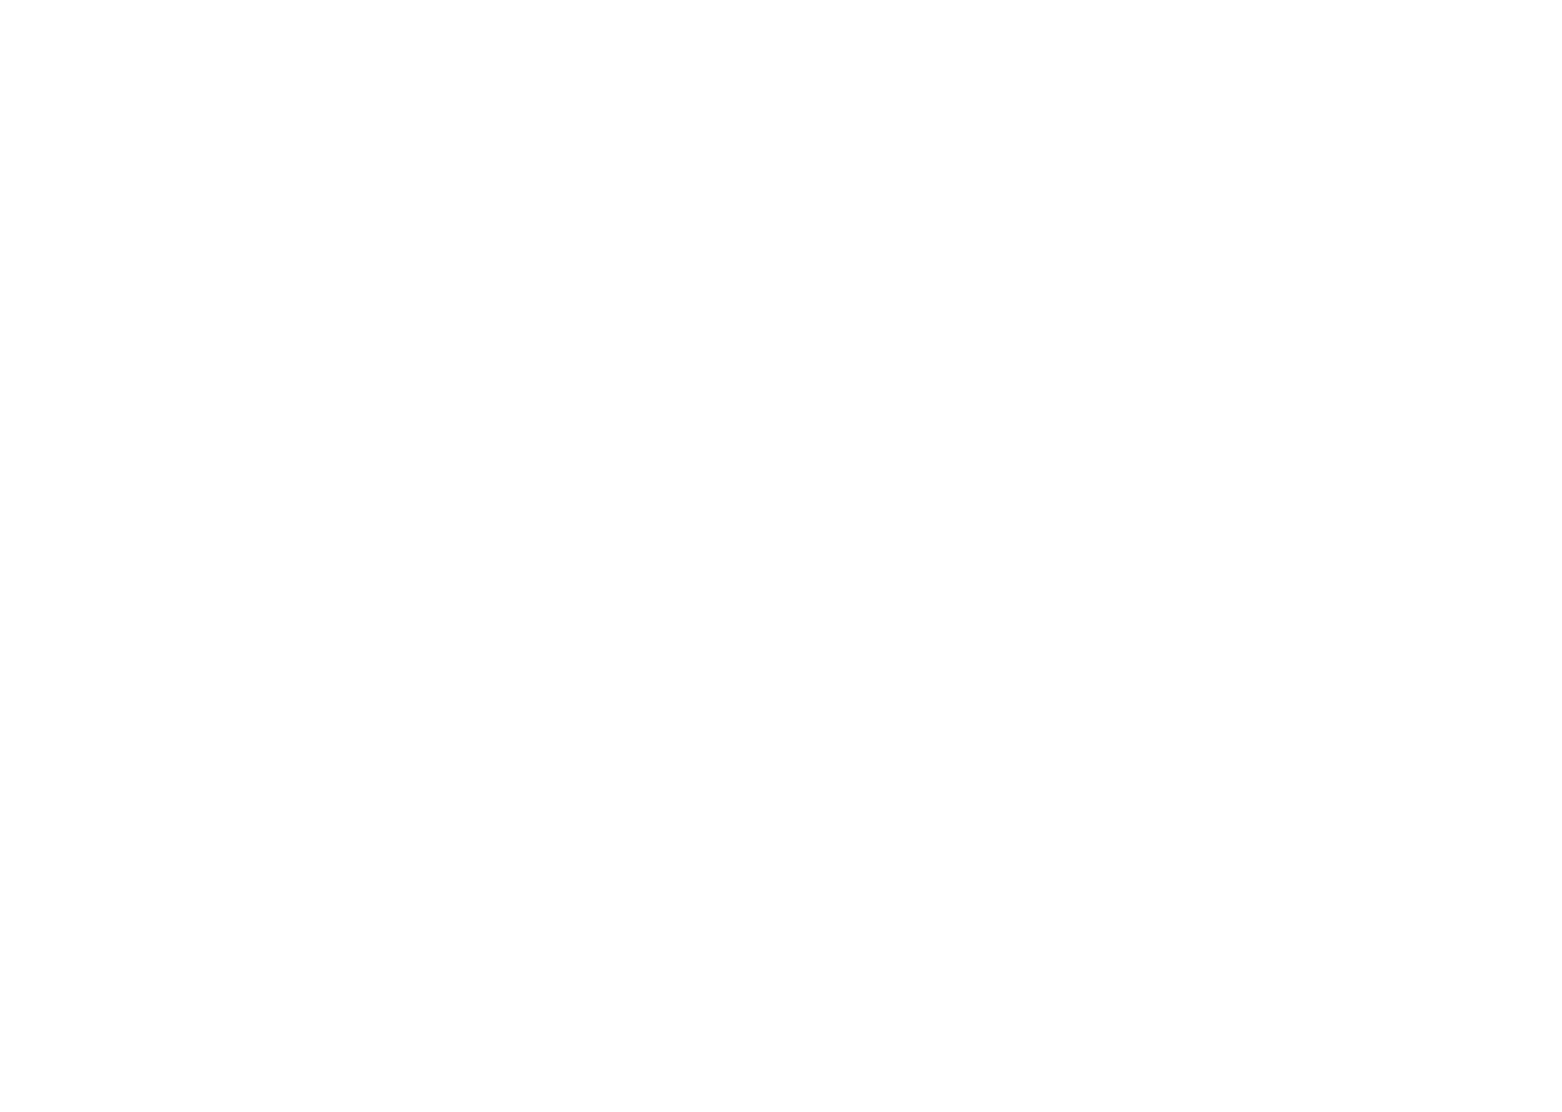 North Industrial Chemicals is proud to be a part of the Alliance for Chemical Distribution